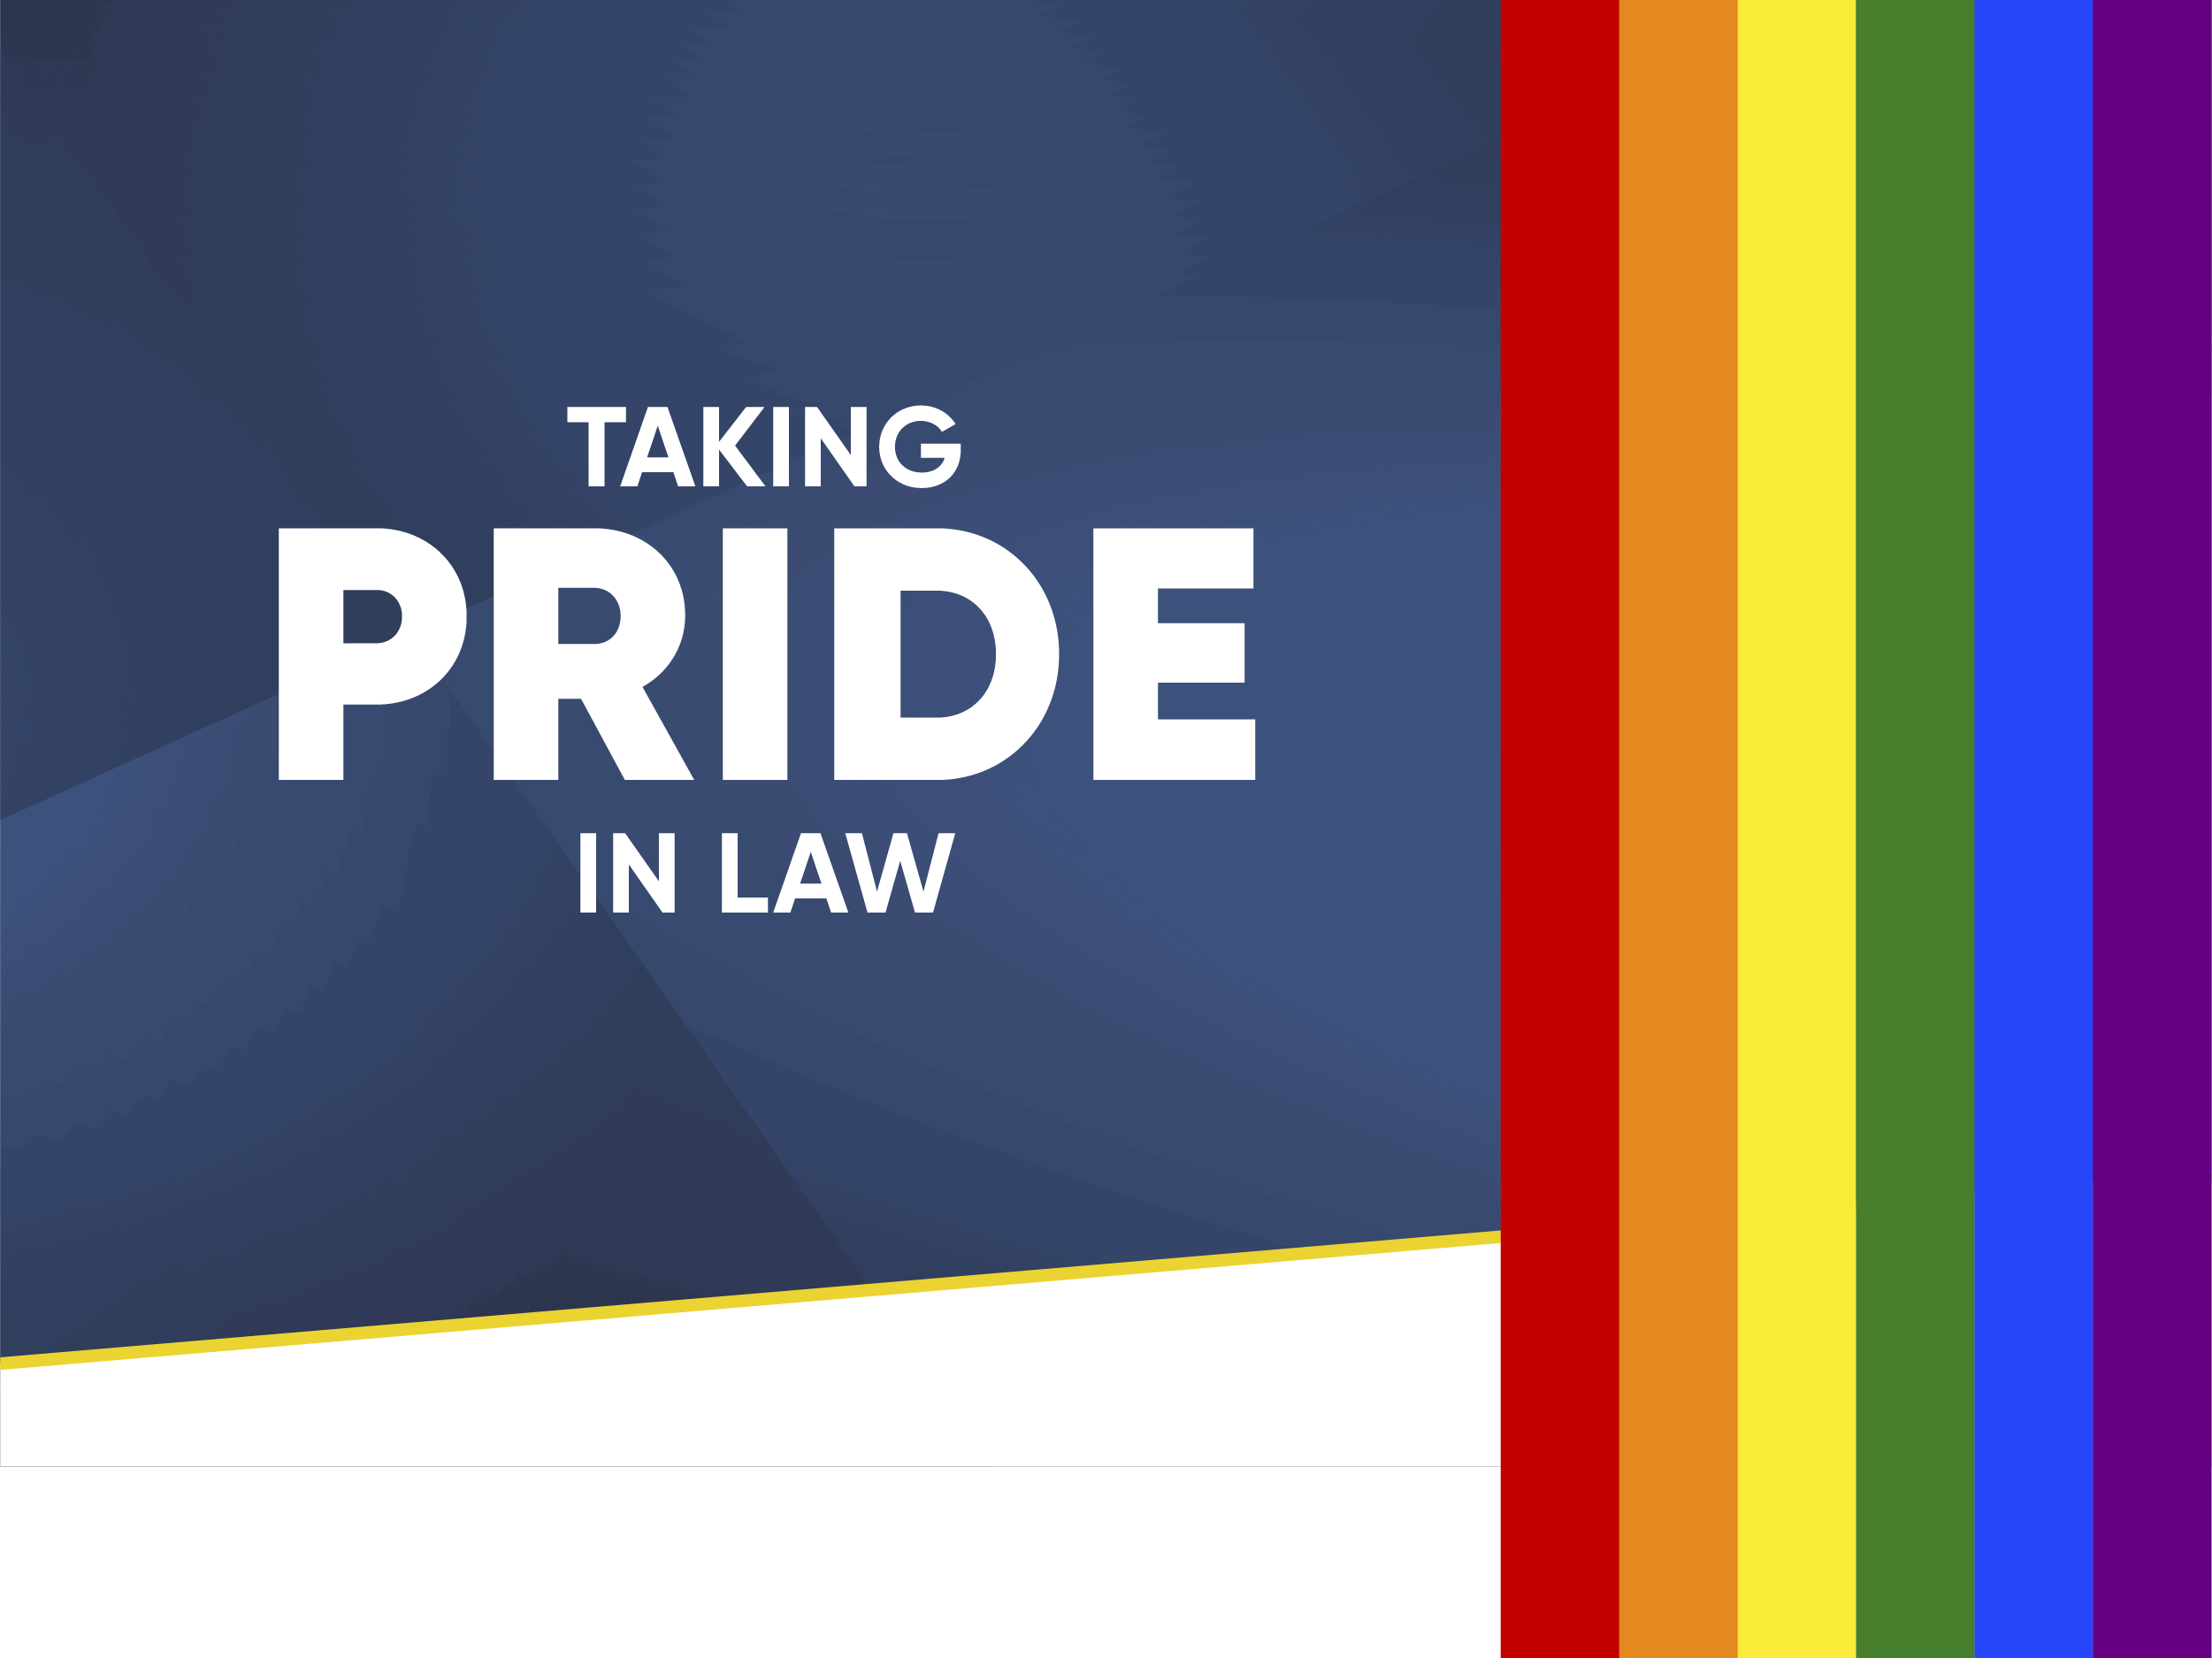 Taking pride in law with LGBTQ flag